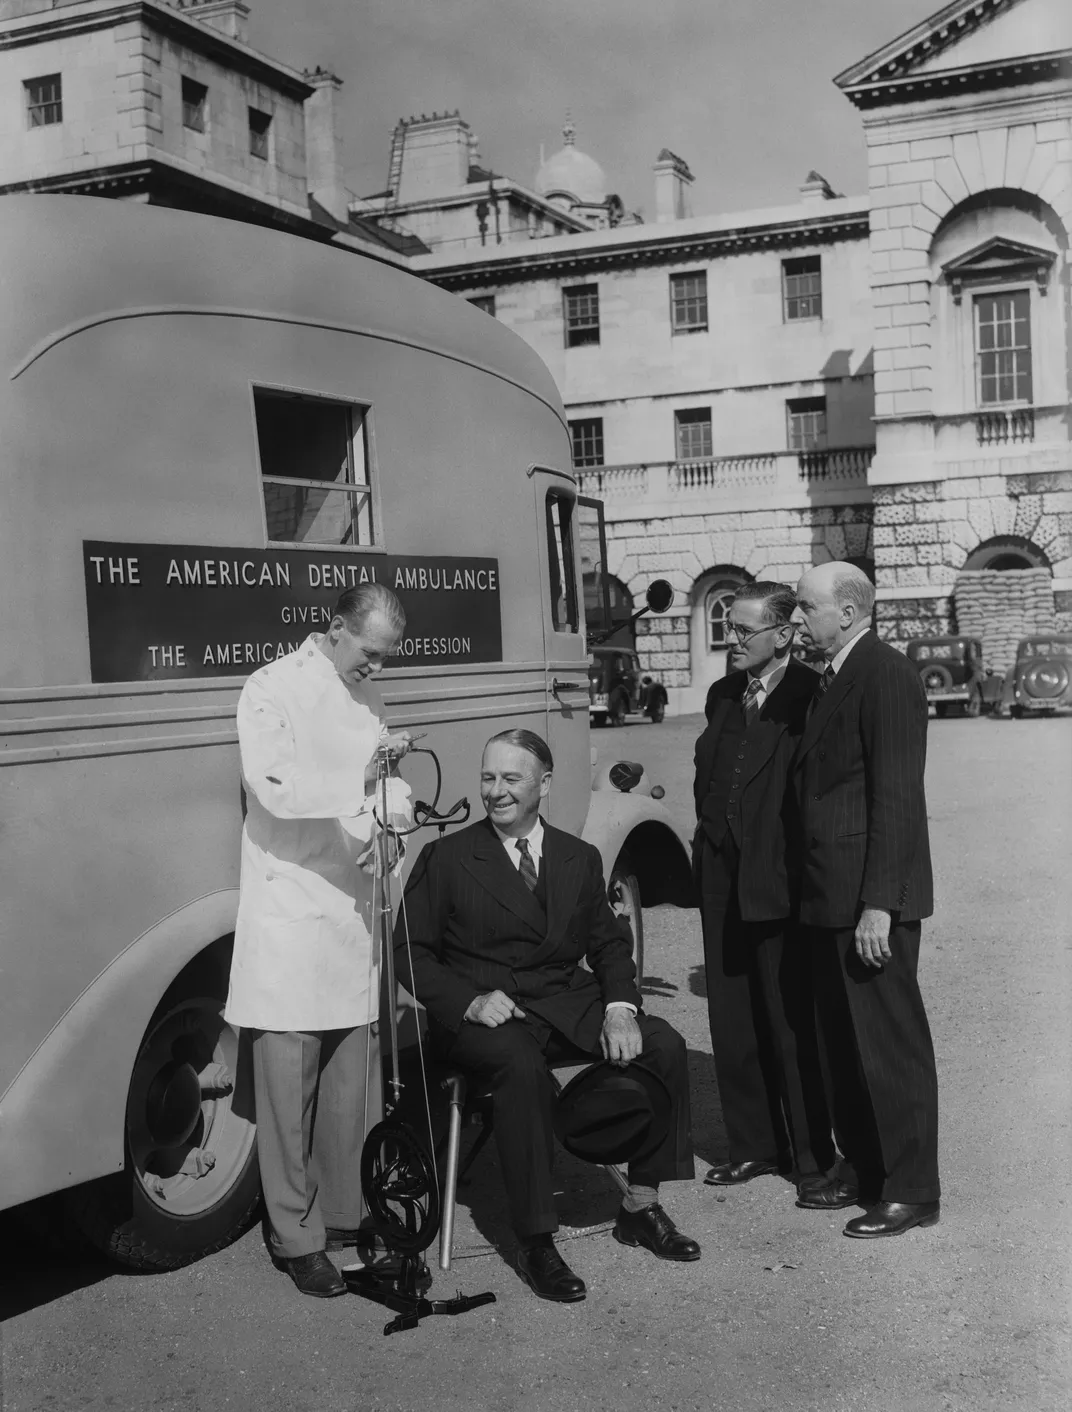 Harold Gillies (far right) watches a demonstration by a fully equipped dental ambulance at Horse Guards Parade in London in 1940